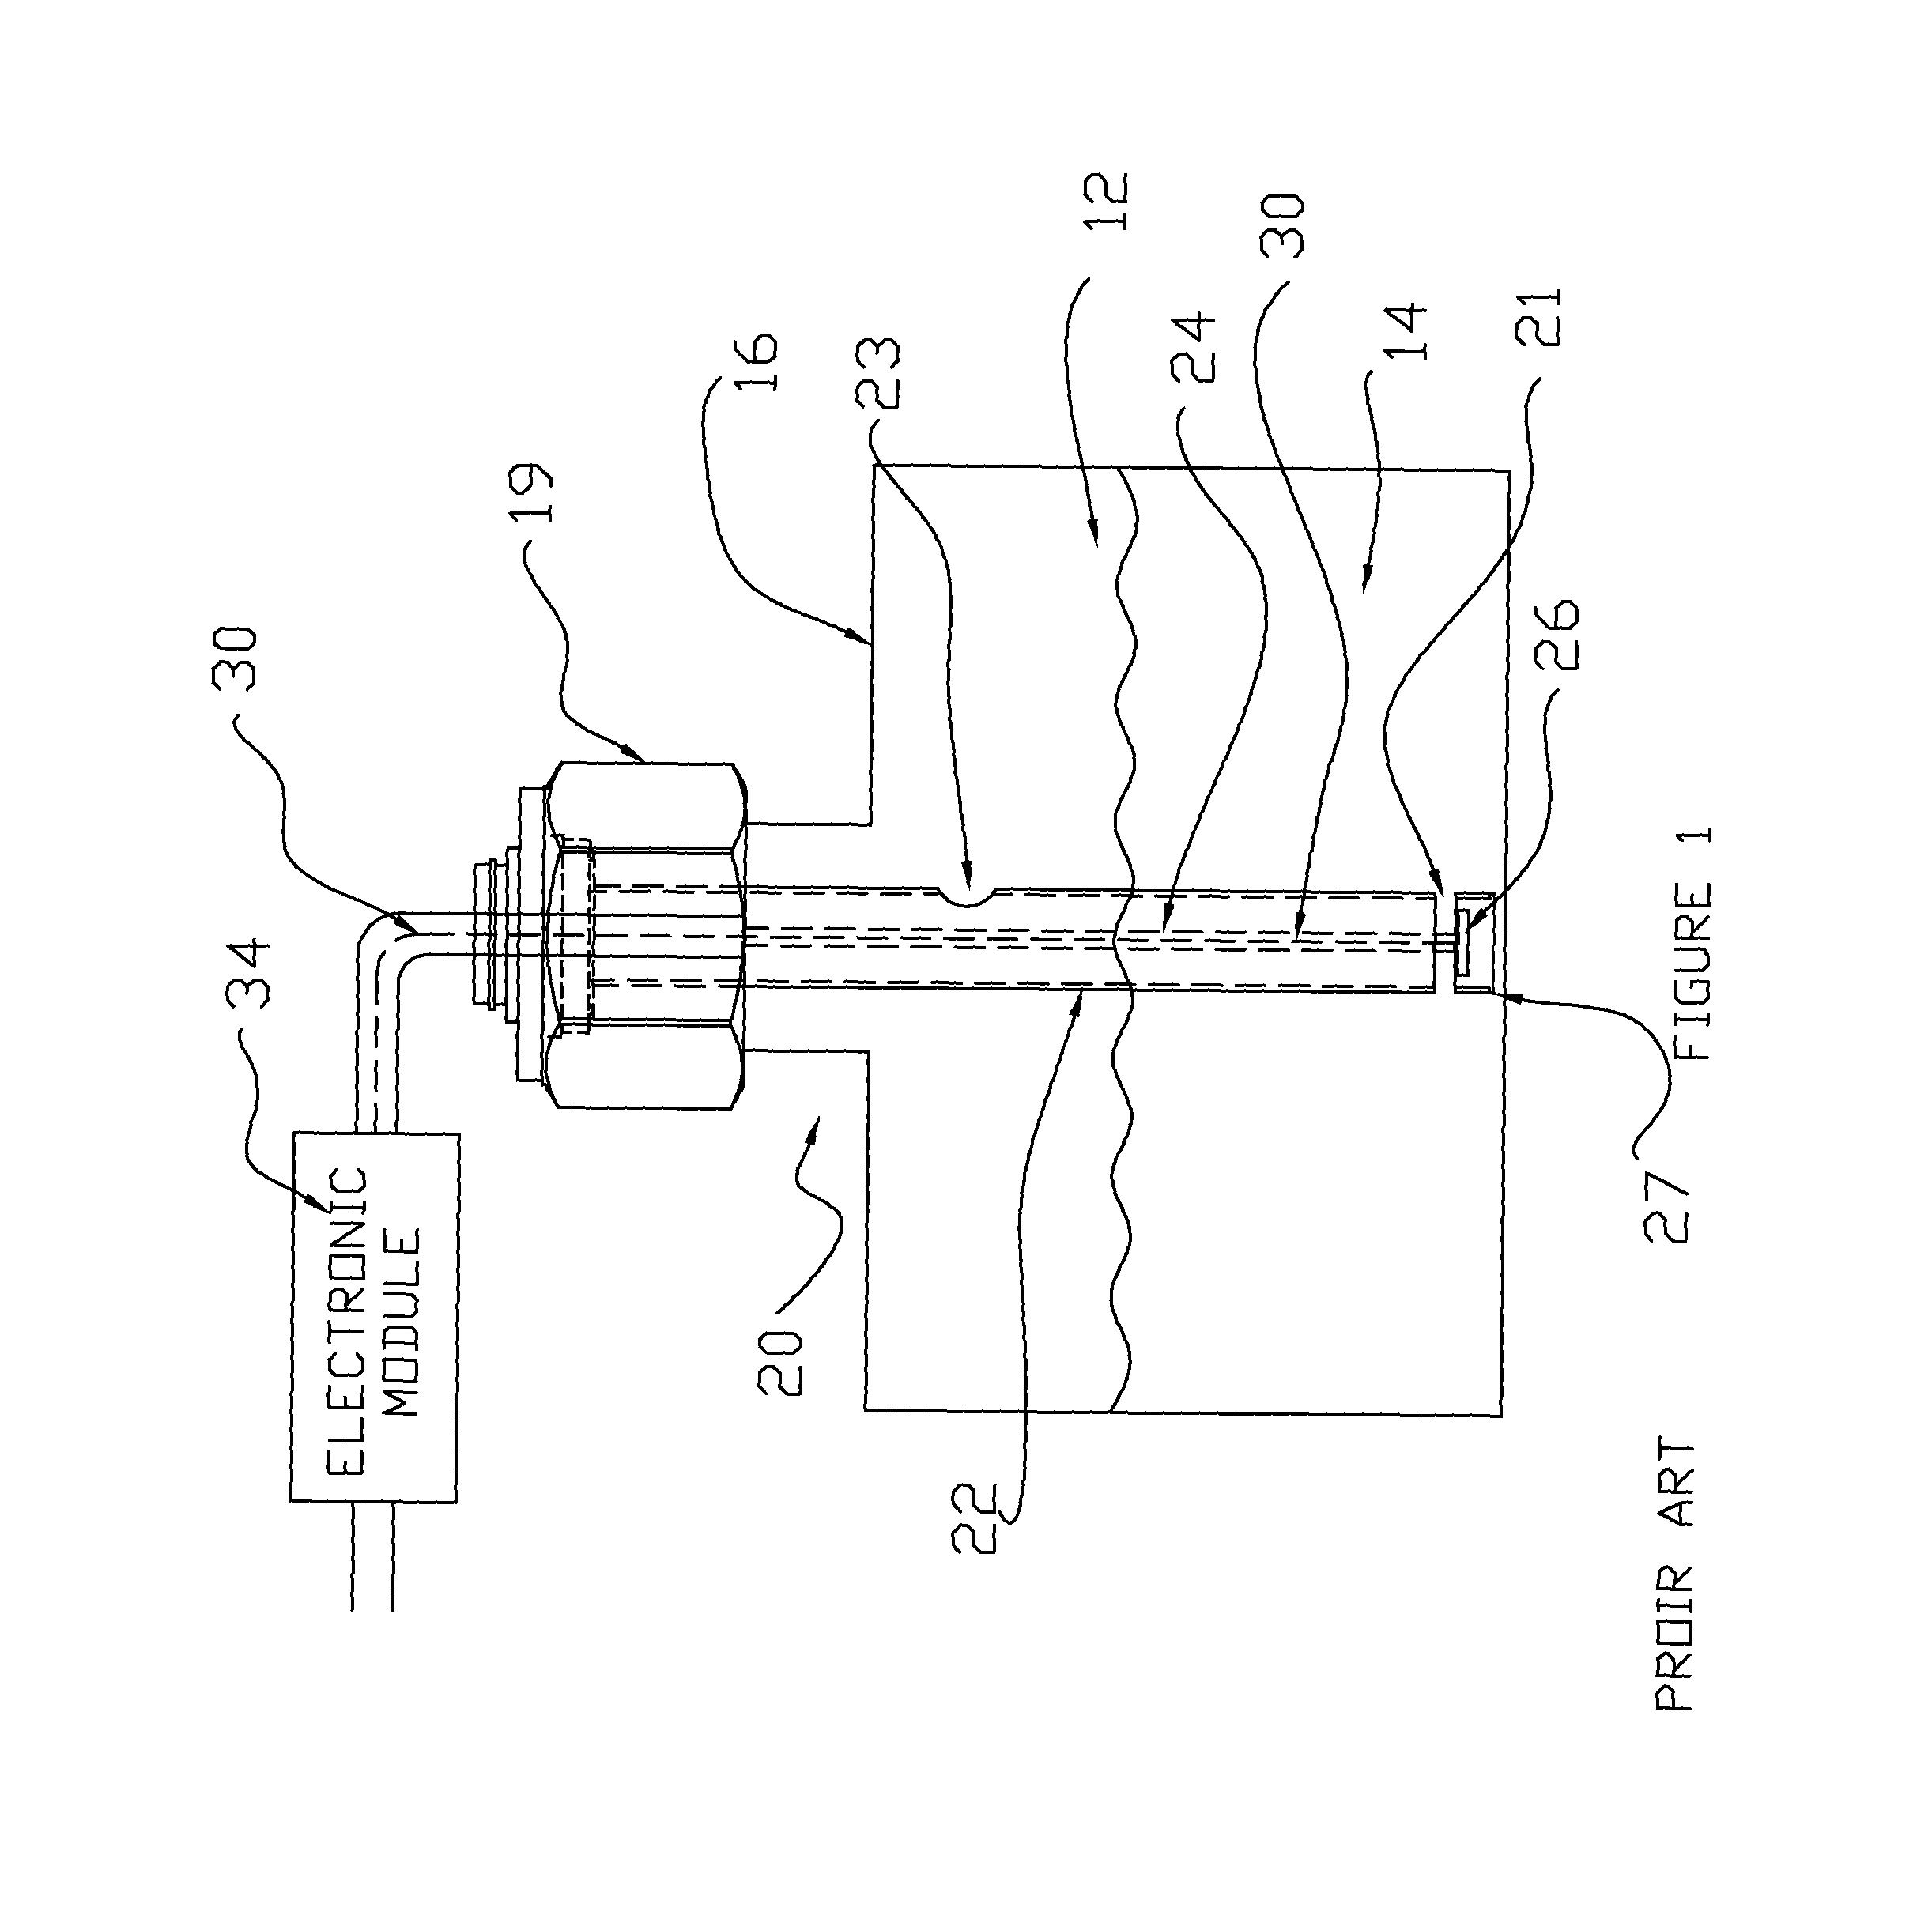 Bottom up contact type ultrasonic continuous level sensor